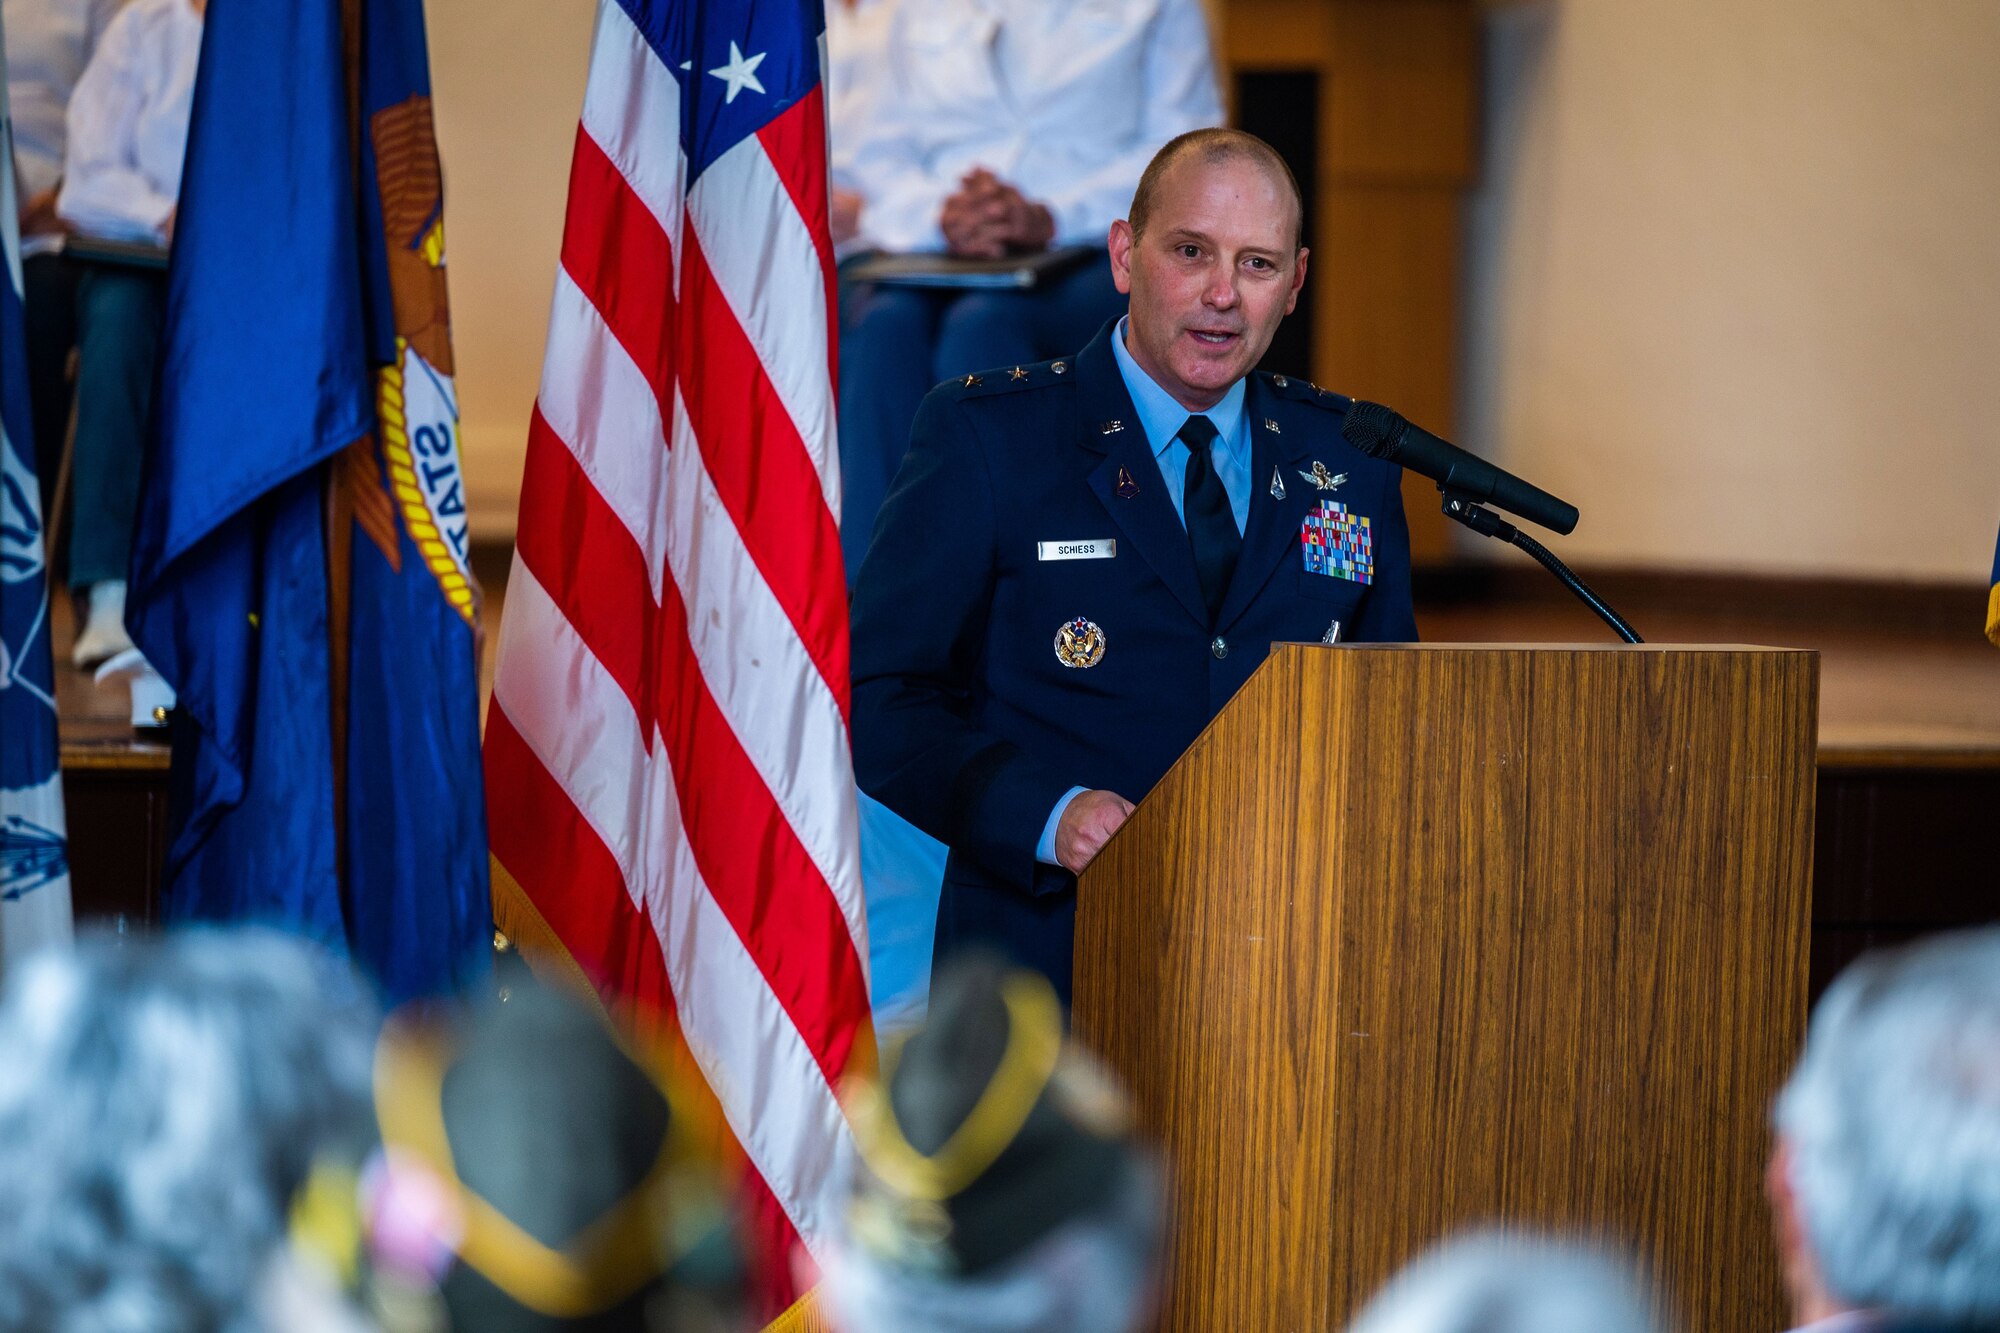 U.S. Space Force Maj. Gen. Douglas A. Schiess, Combined Force Space Component Command commander, gives his keynote speech during a Memorial Day ceremony at the Solvang Veterans Memorial Hall in Solvang, Calif., May 29, 2023. General Schiess gave the keynote speech to over 200 attendees that included veterans from the Global War on Terrorism, Vietnam, Korea and even one veteran from WWII. The ceremony also included the raising on the American Flag by a local Cub Scouts group and a laying of a wreath with a Gold Star family member. (U.S. Space Force photo by Tech. Sgt. Luke Kitterman)